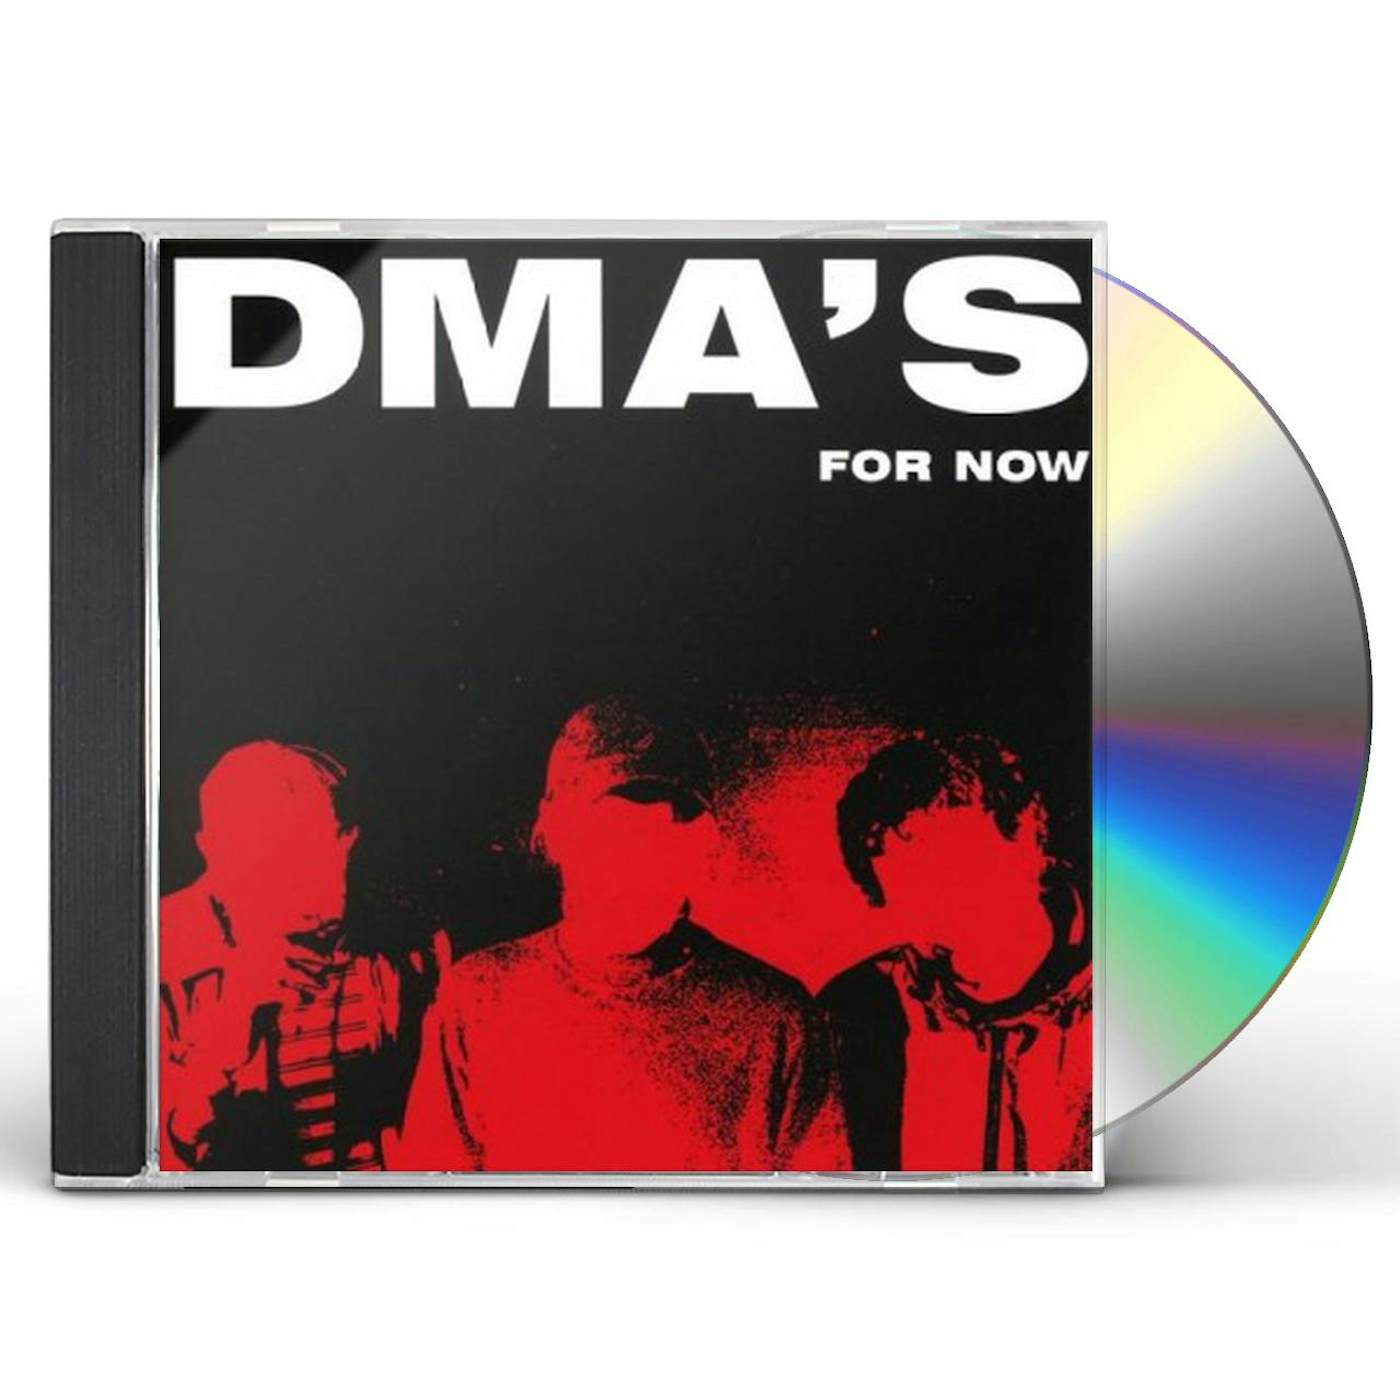 DMA'S For Now CD